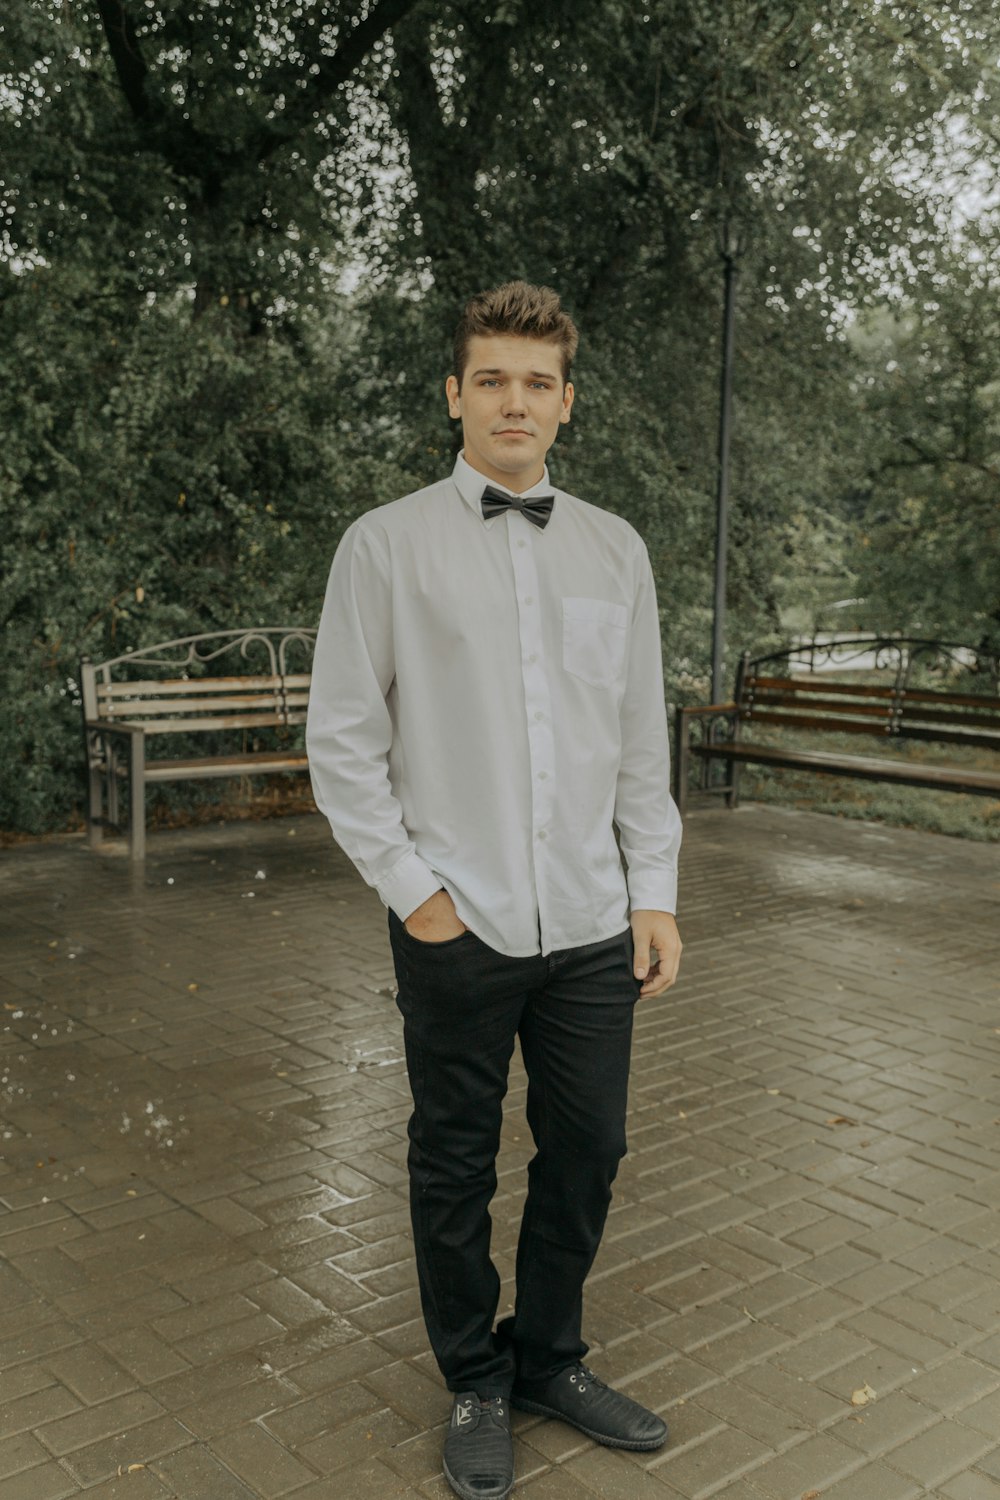 a young man wearing a bow tie standing in a park